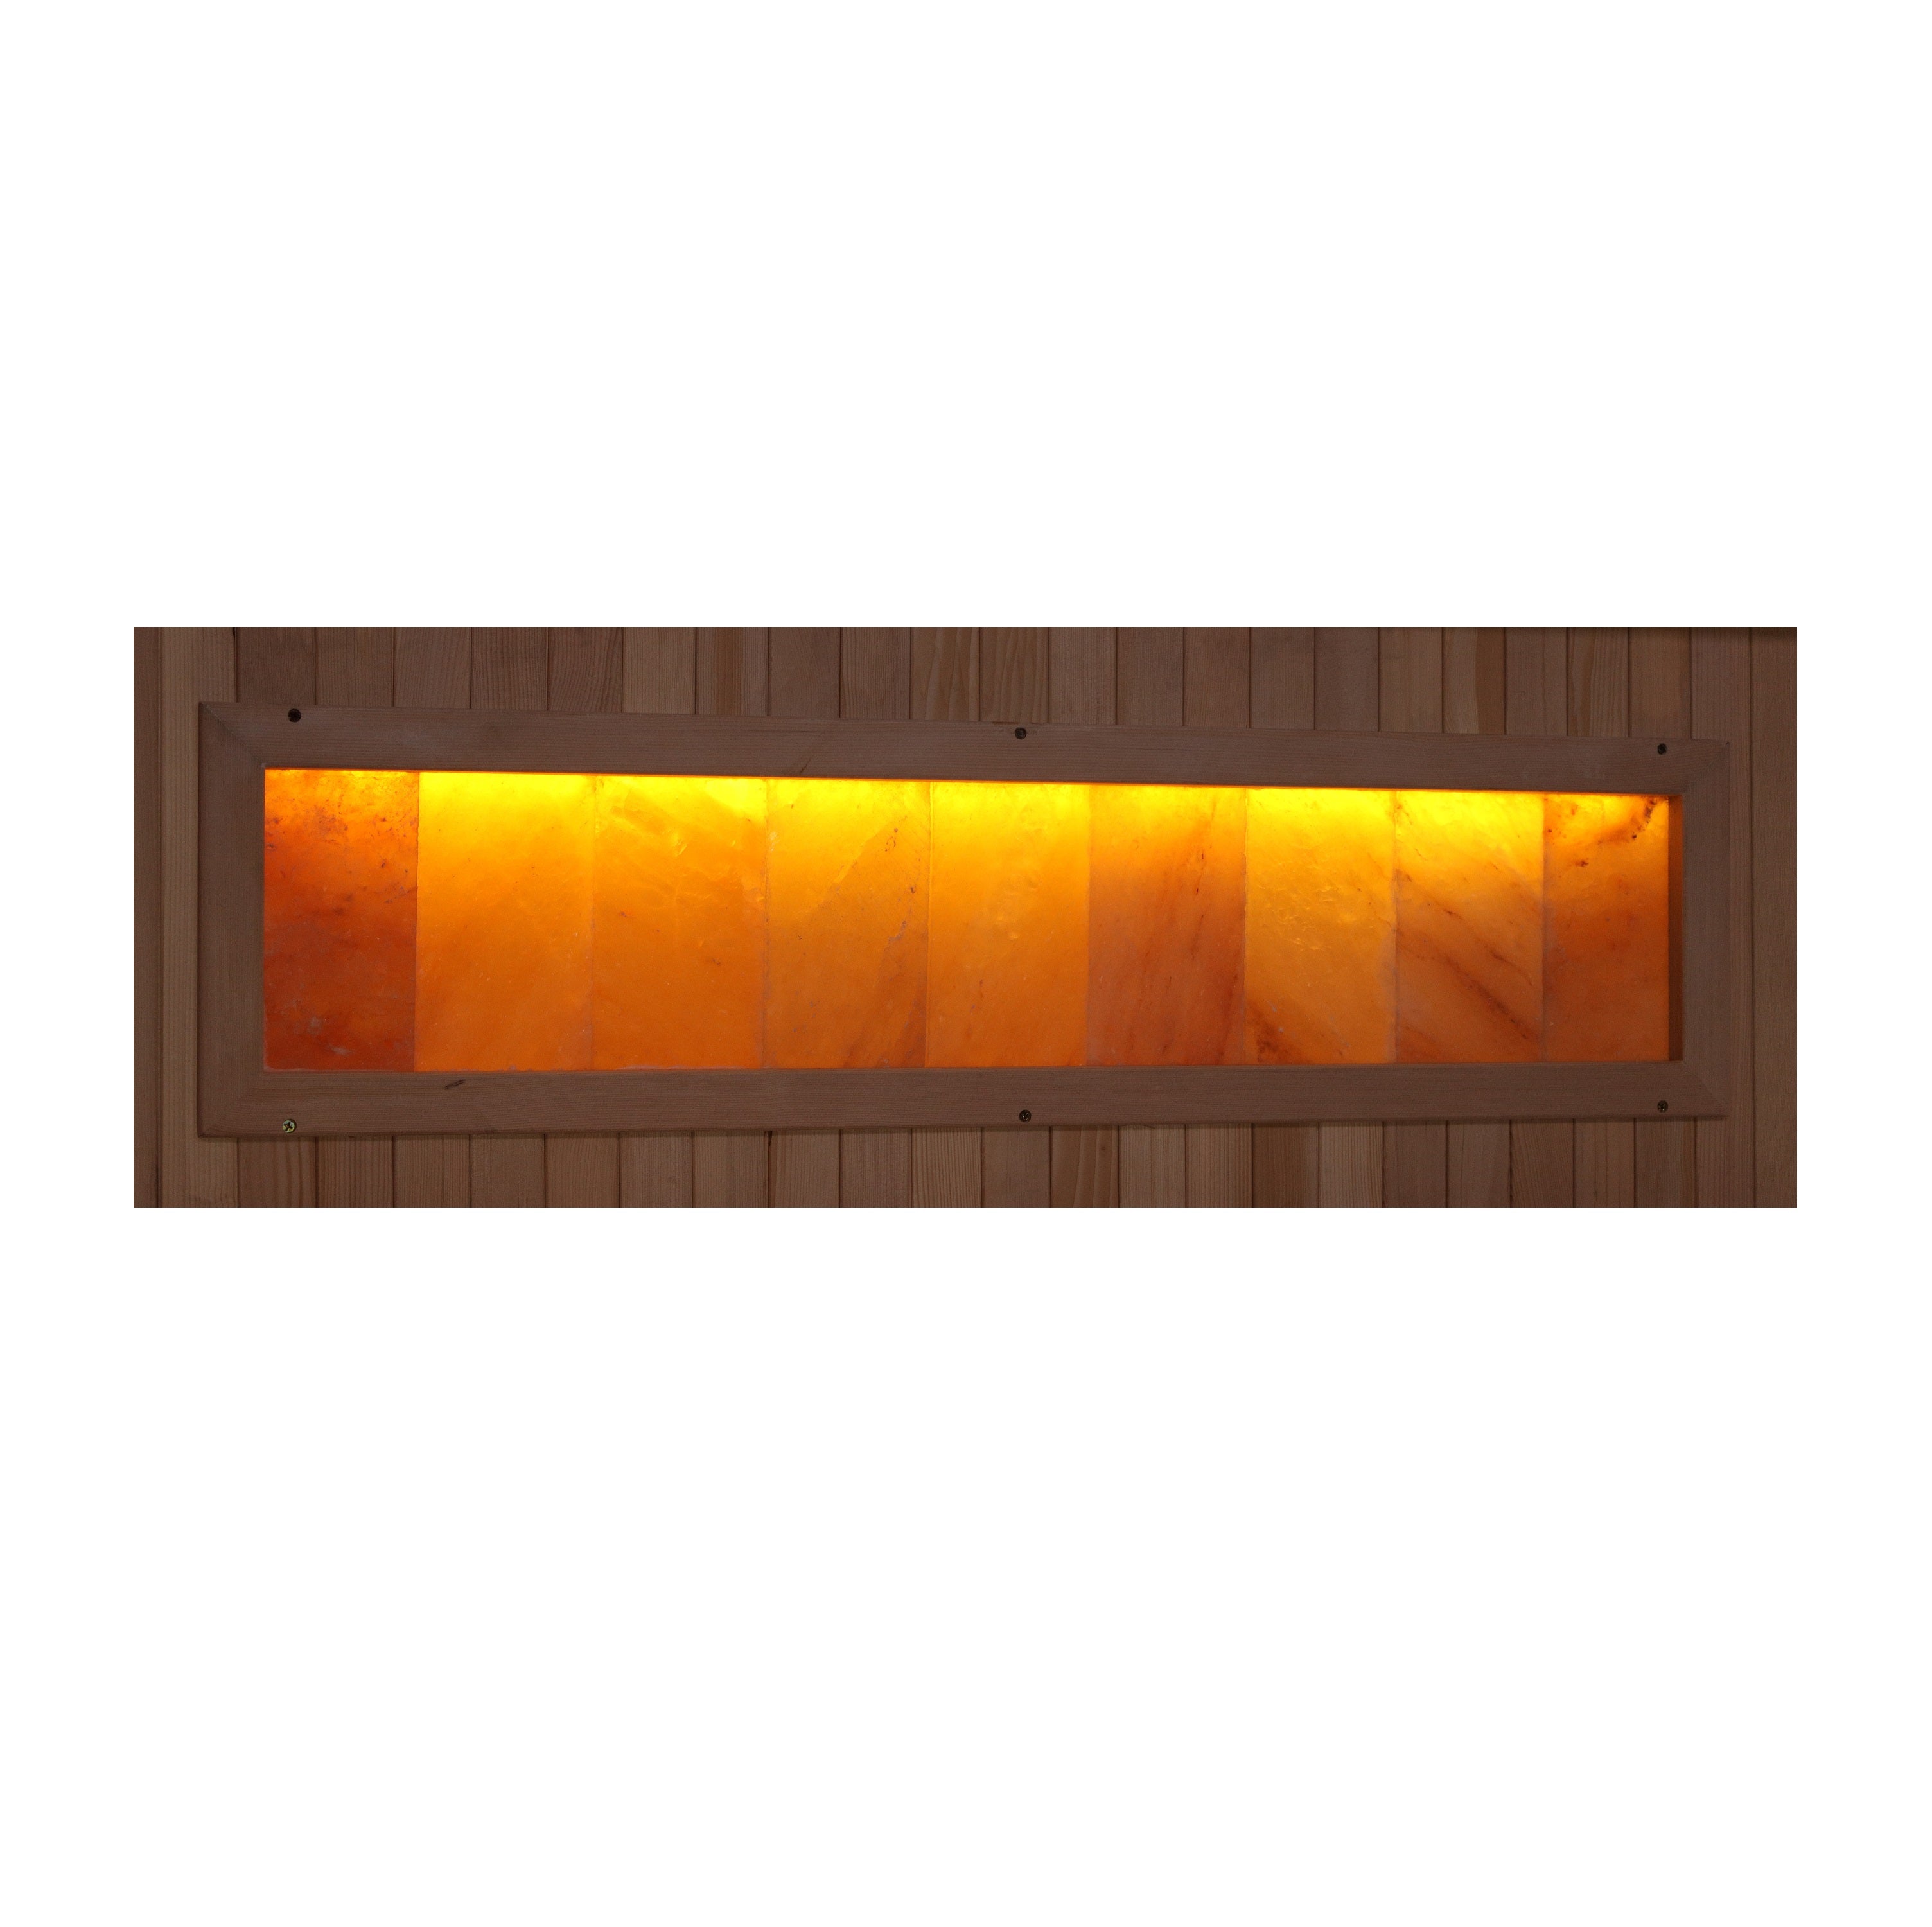 Reserve Edition 3 Person Full Spectrum with HIMALAYAN SALT BAR - $150 DISCOUNT LIMITED OFFER  - IN STOCK